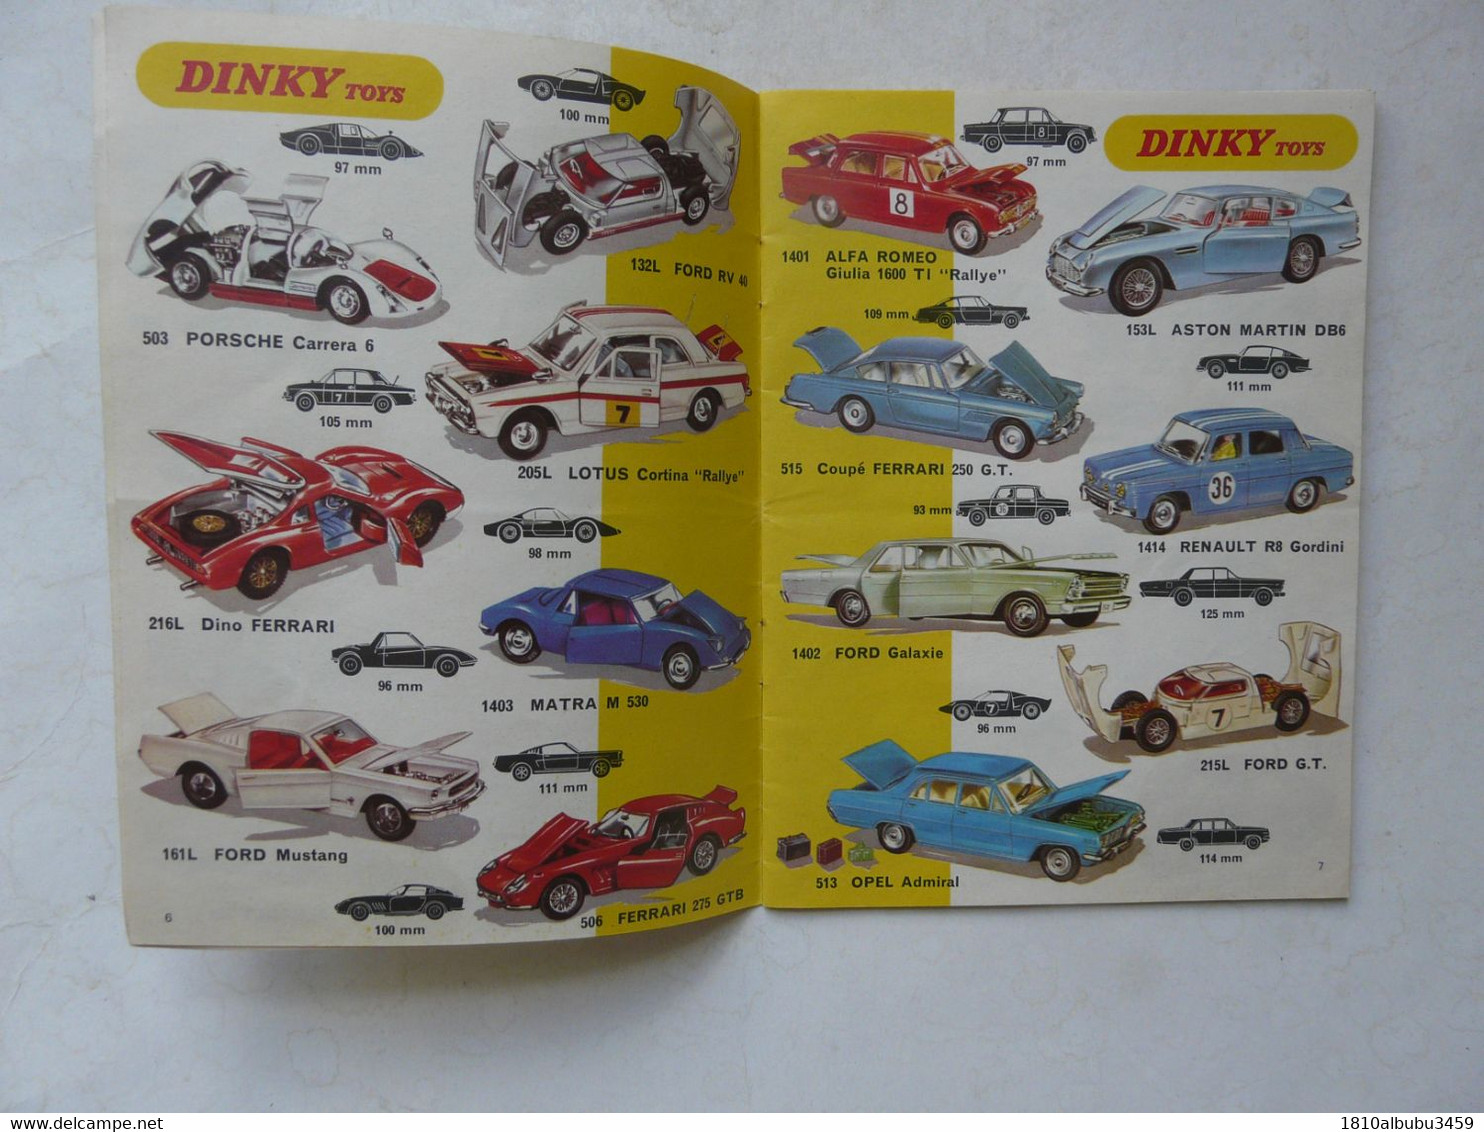 BROCHURE DOCUMENTAIRE - DINKY TOYS - Model Making